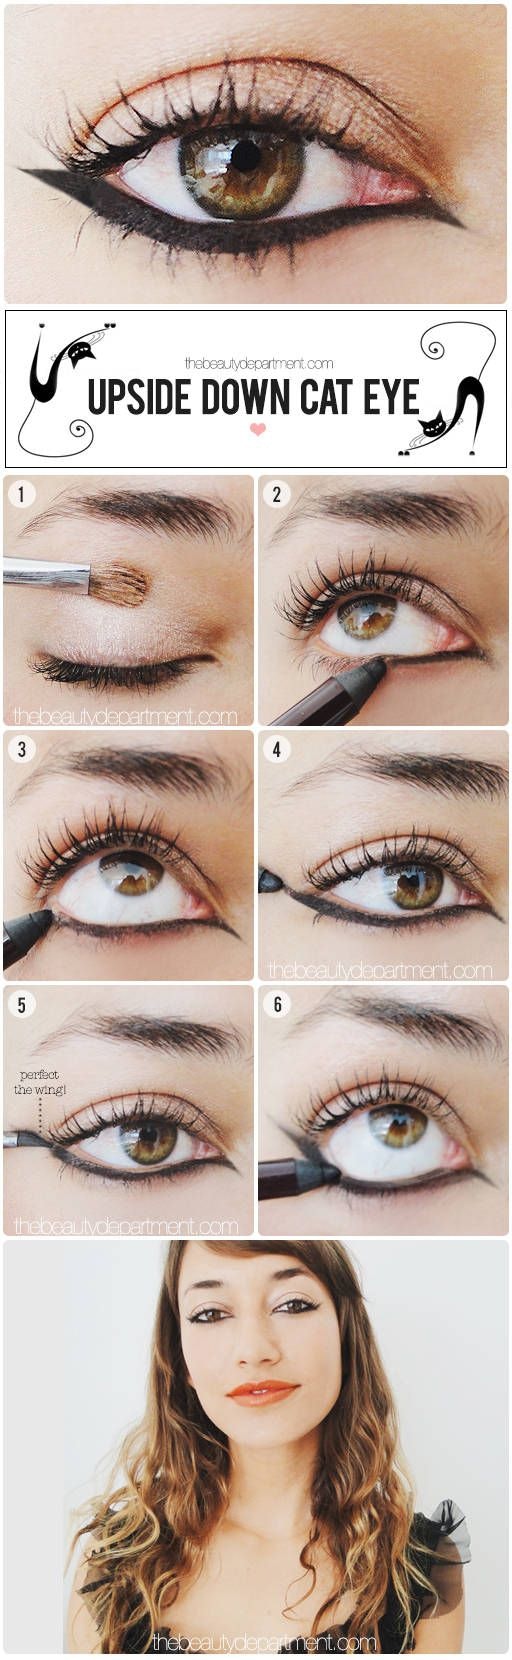 7 Eyeliner Looks You Need To Add To Your Makeup Repertoire Immediately